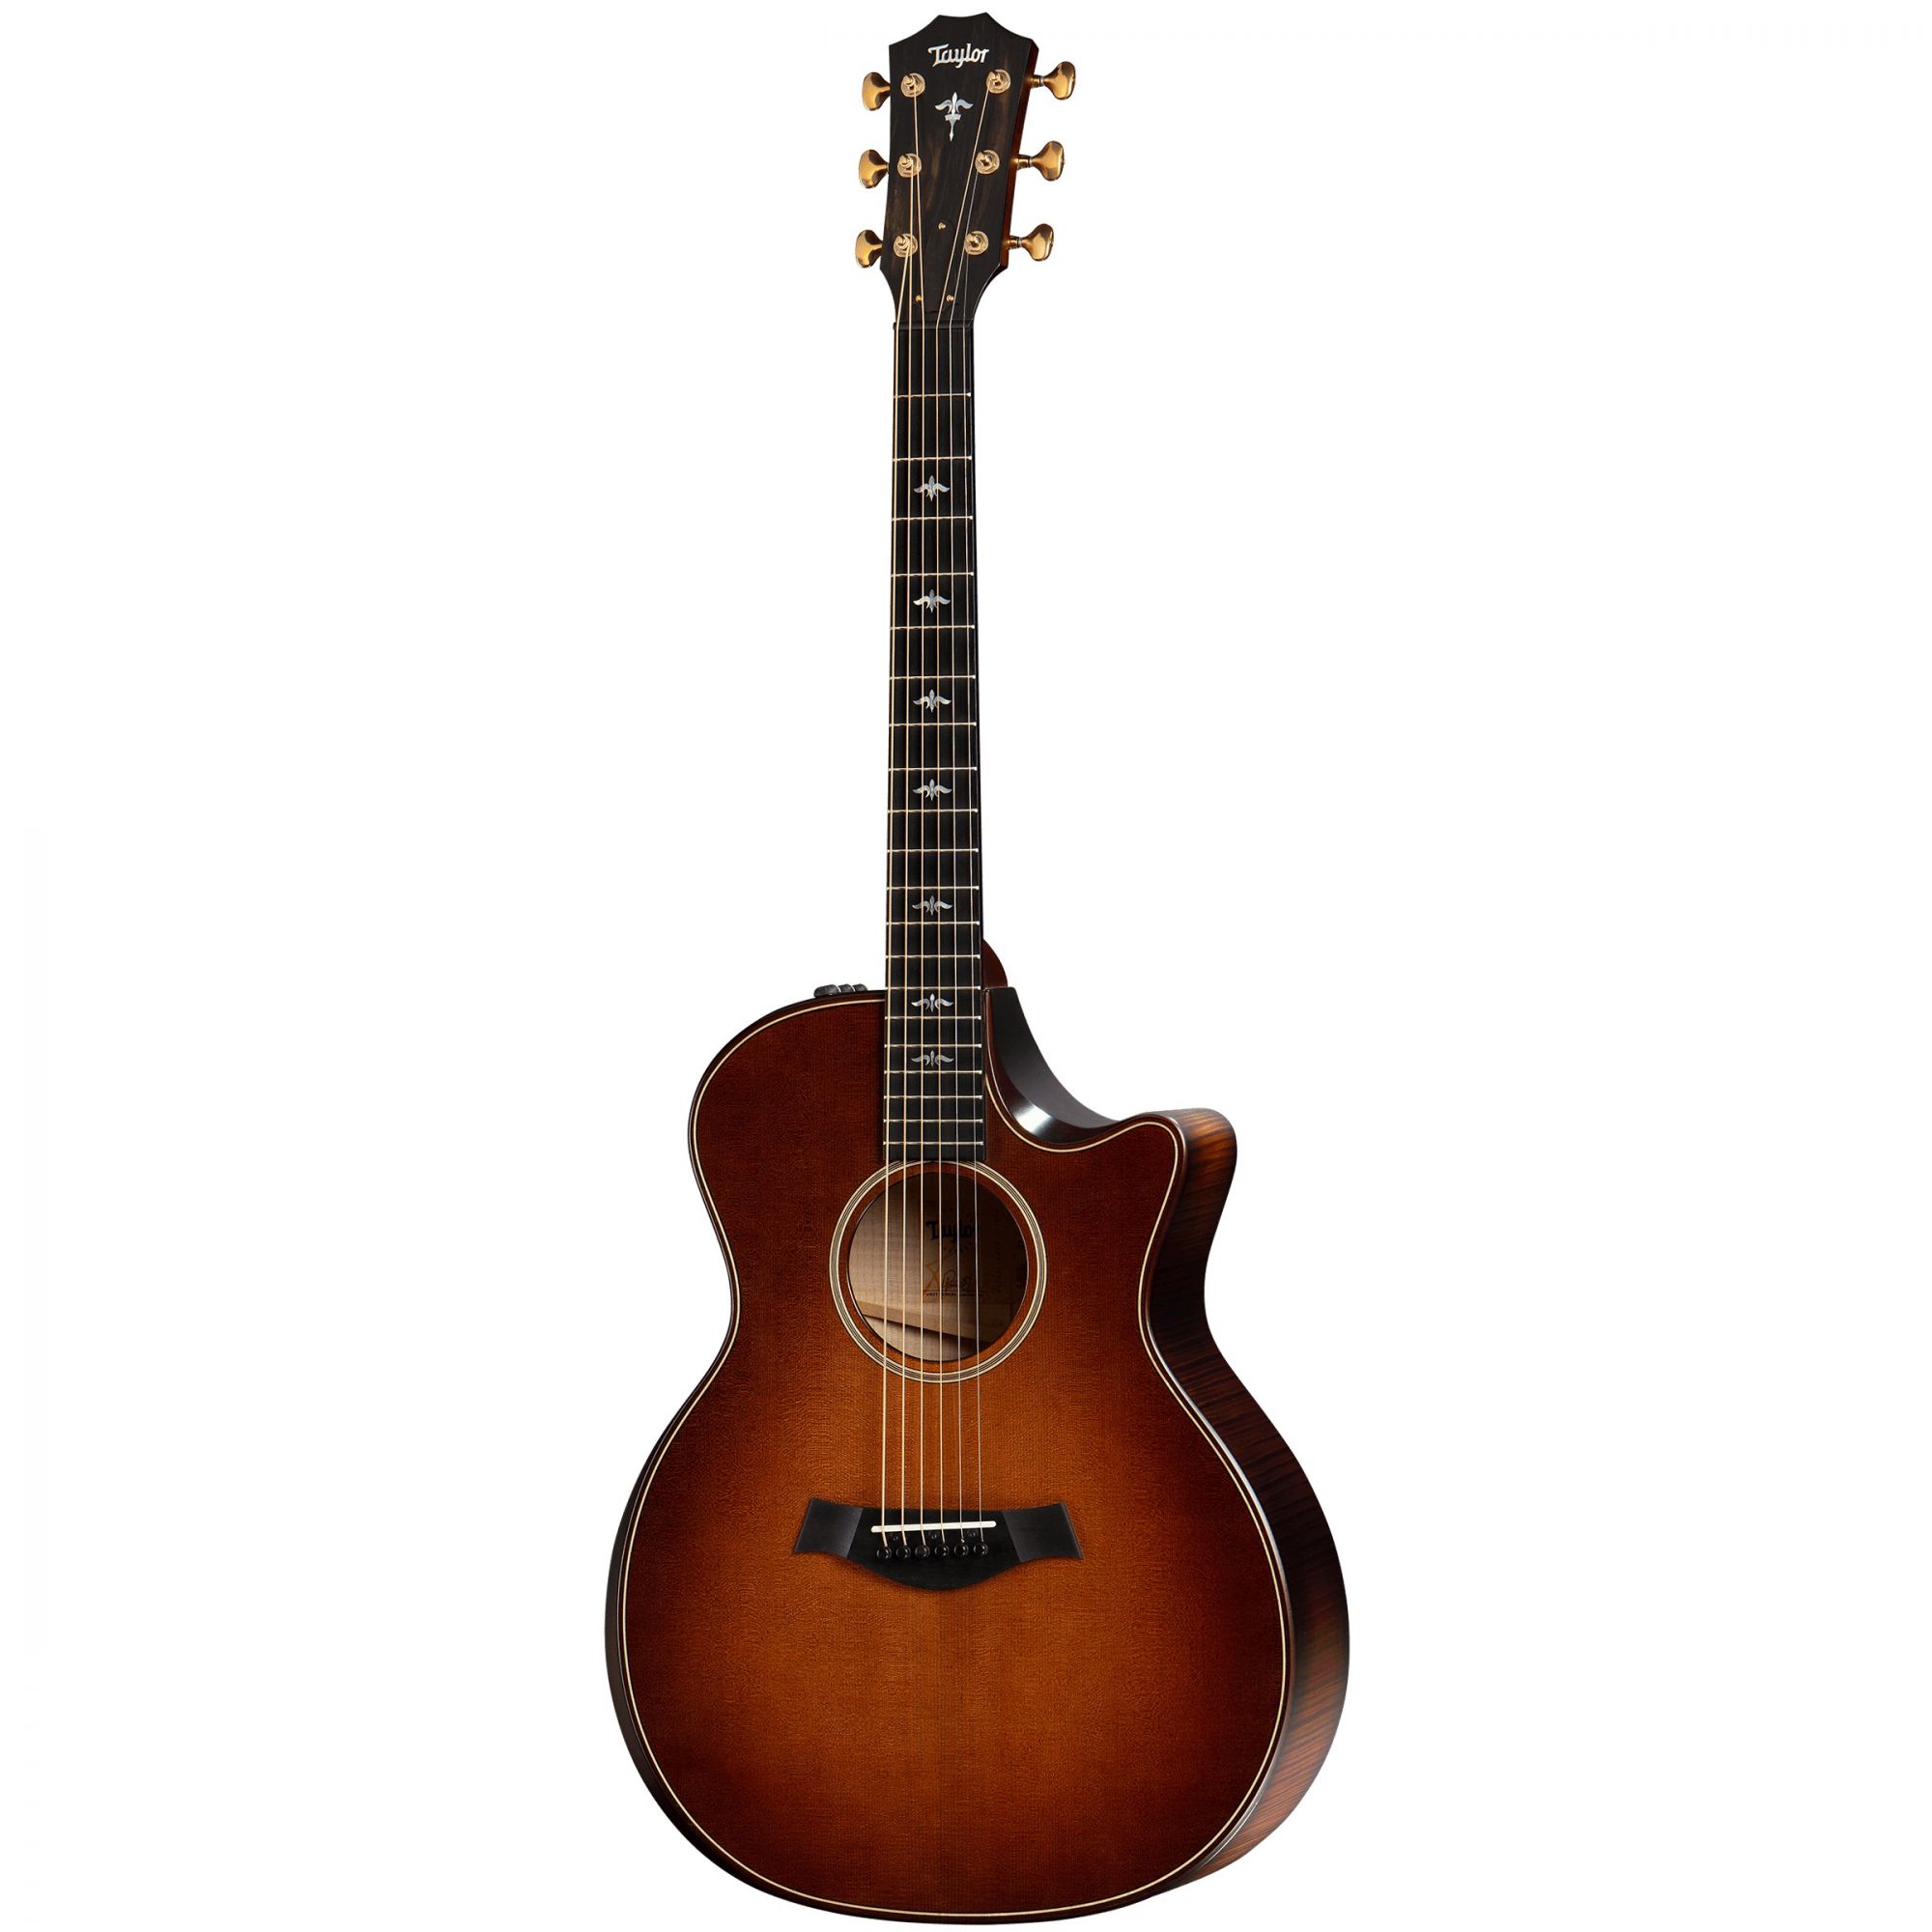 Taylor Builder's Edition 614ce V-Class Grand Auditorium Acoustic-Electric Guitar WHB